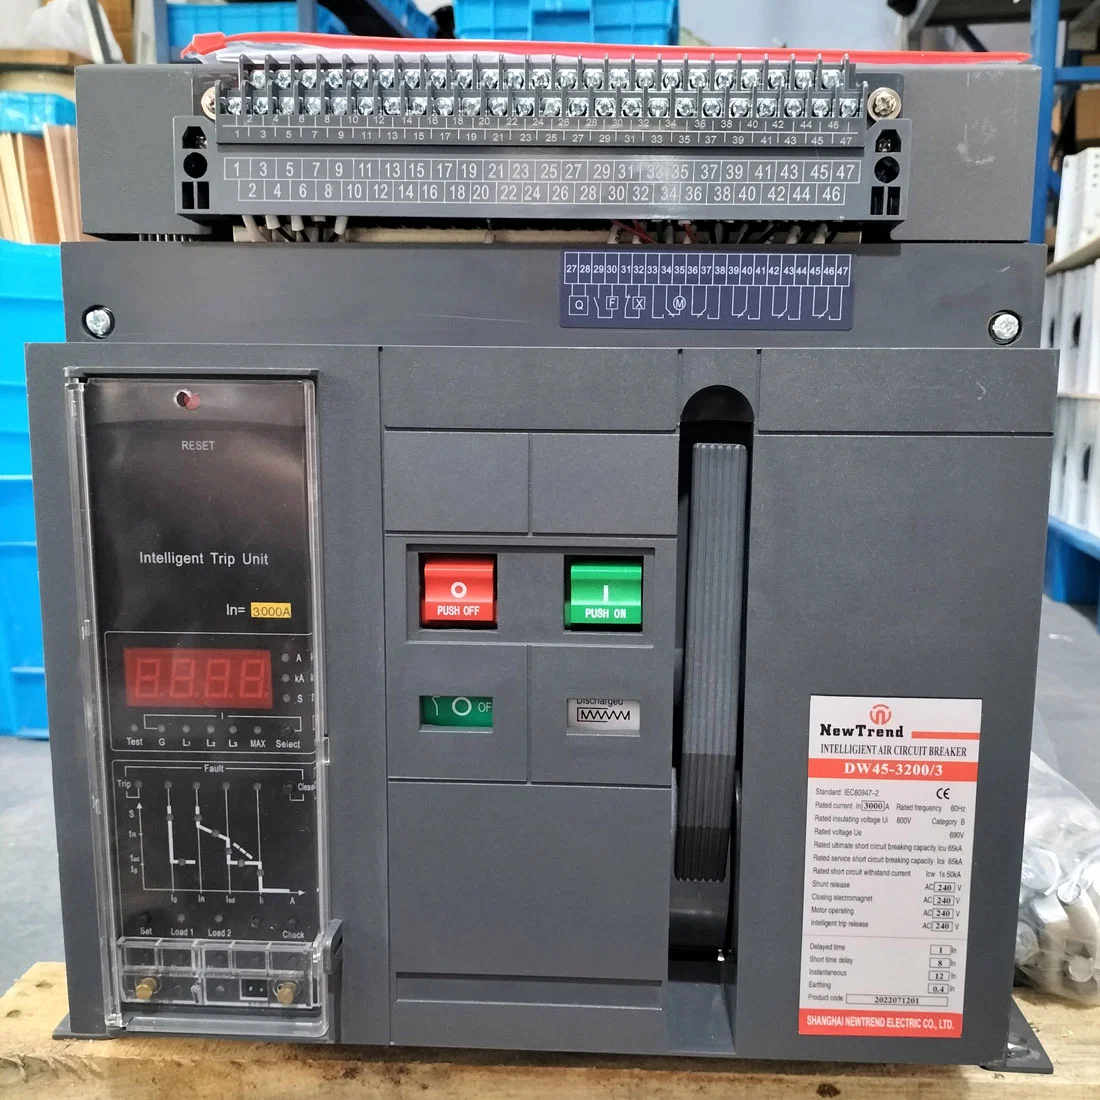 Acb 1600 AMPS 2000 AMPS 2500 AMPS 3200 AMPS 4000 AMPS 5000 AMPS 6300 AMPS AMP Dw45 3 Pole 4 Pole Fixed or Drawable Air Circuit Breaker